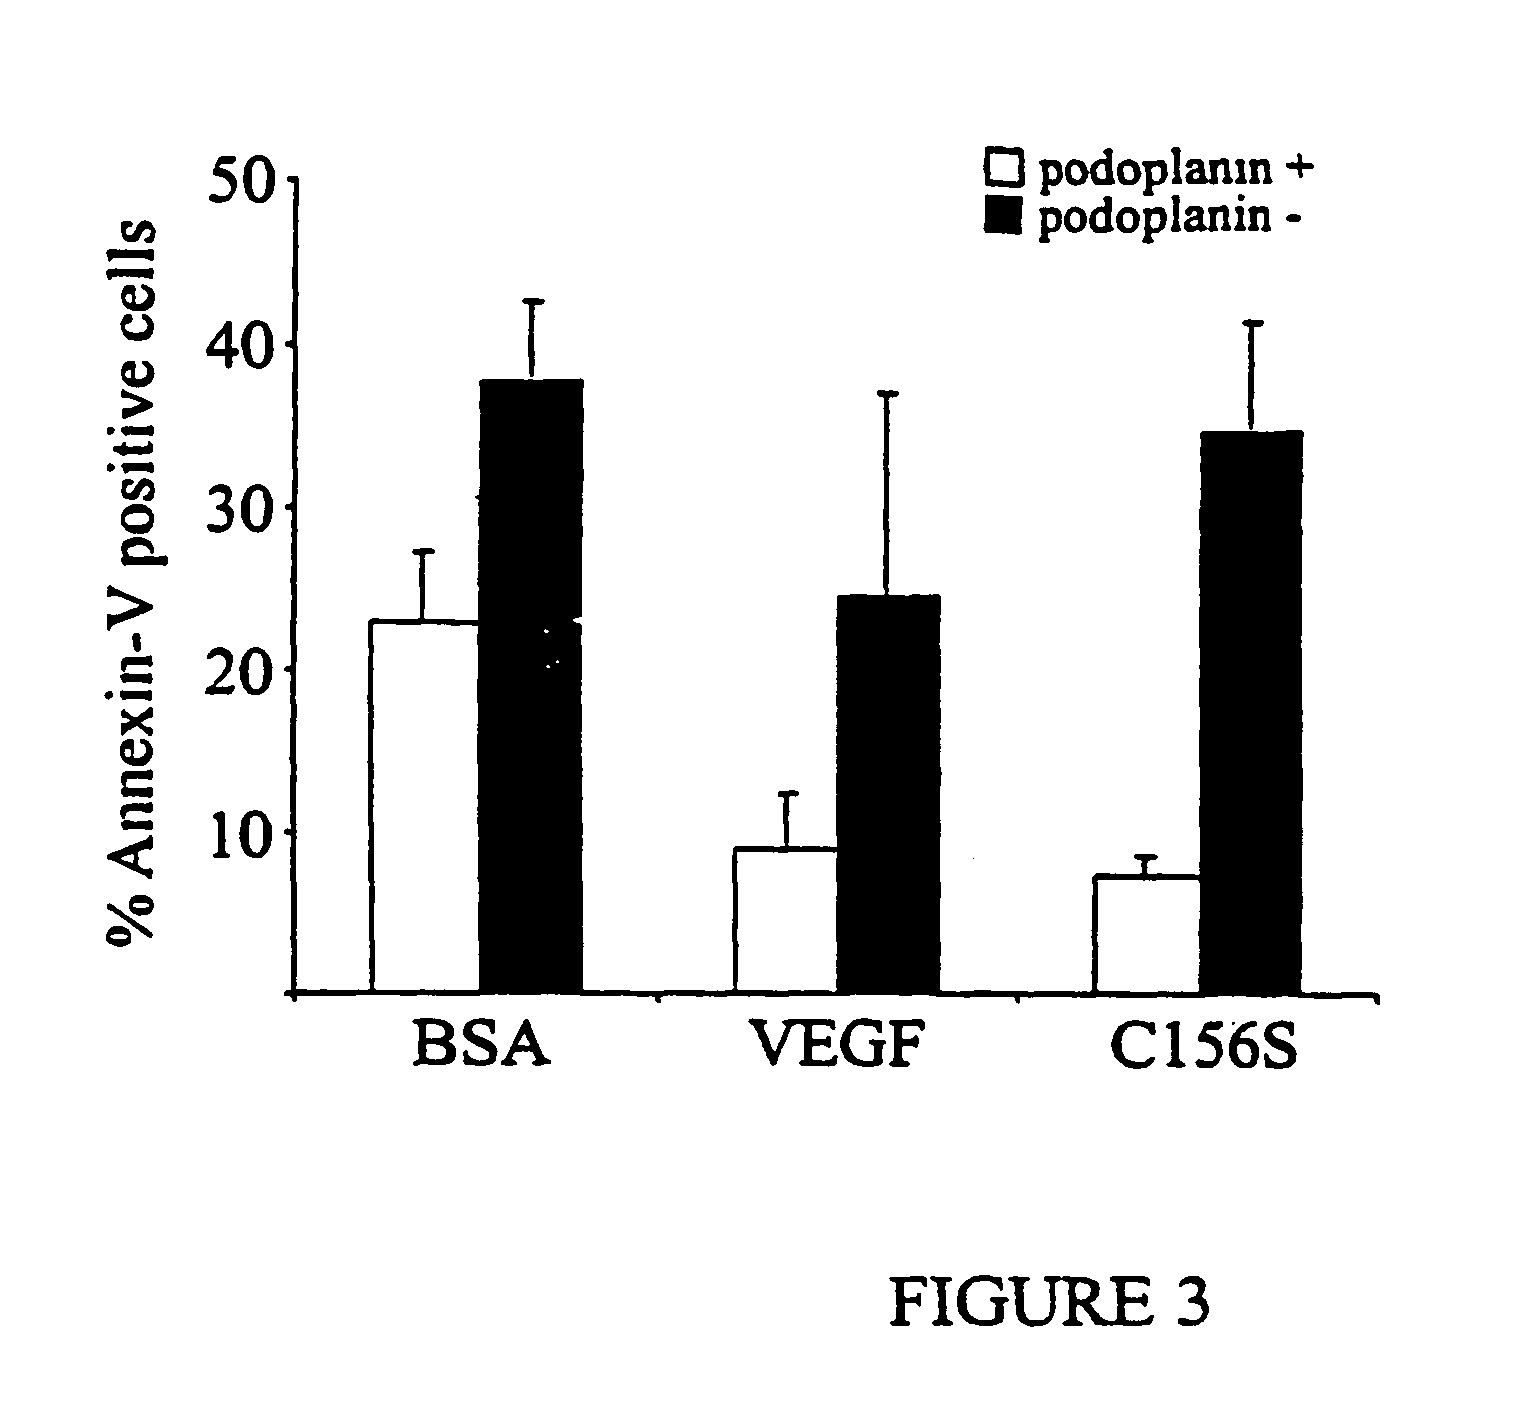 Lymphatic endothelial cells materials and methods